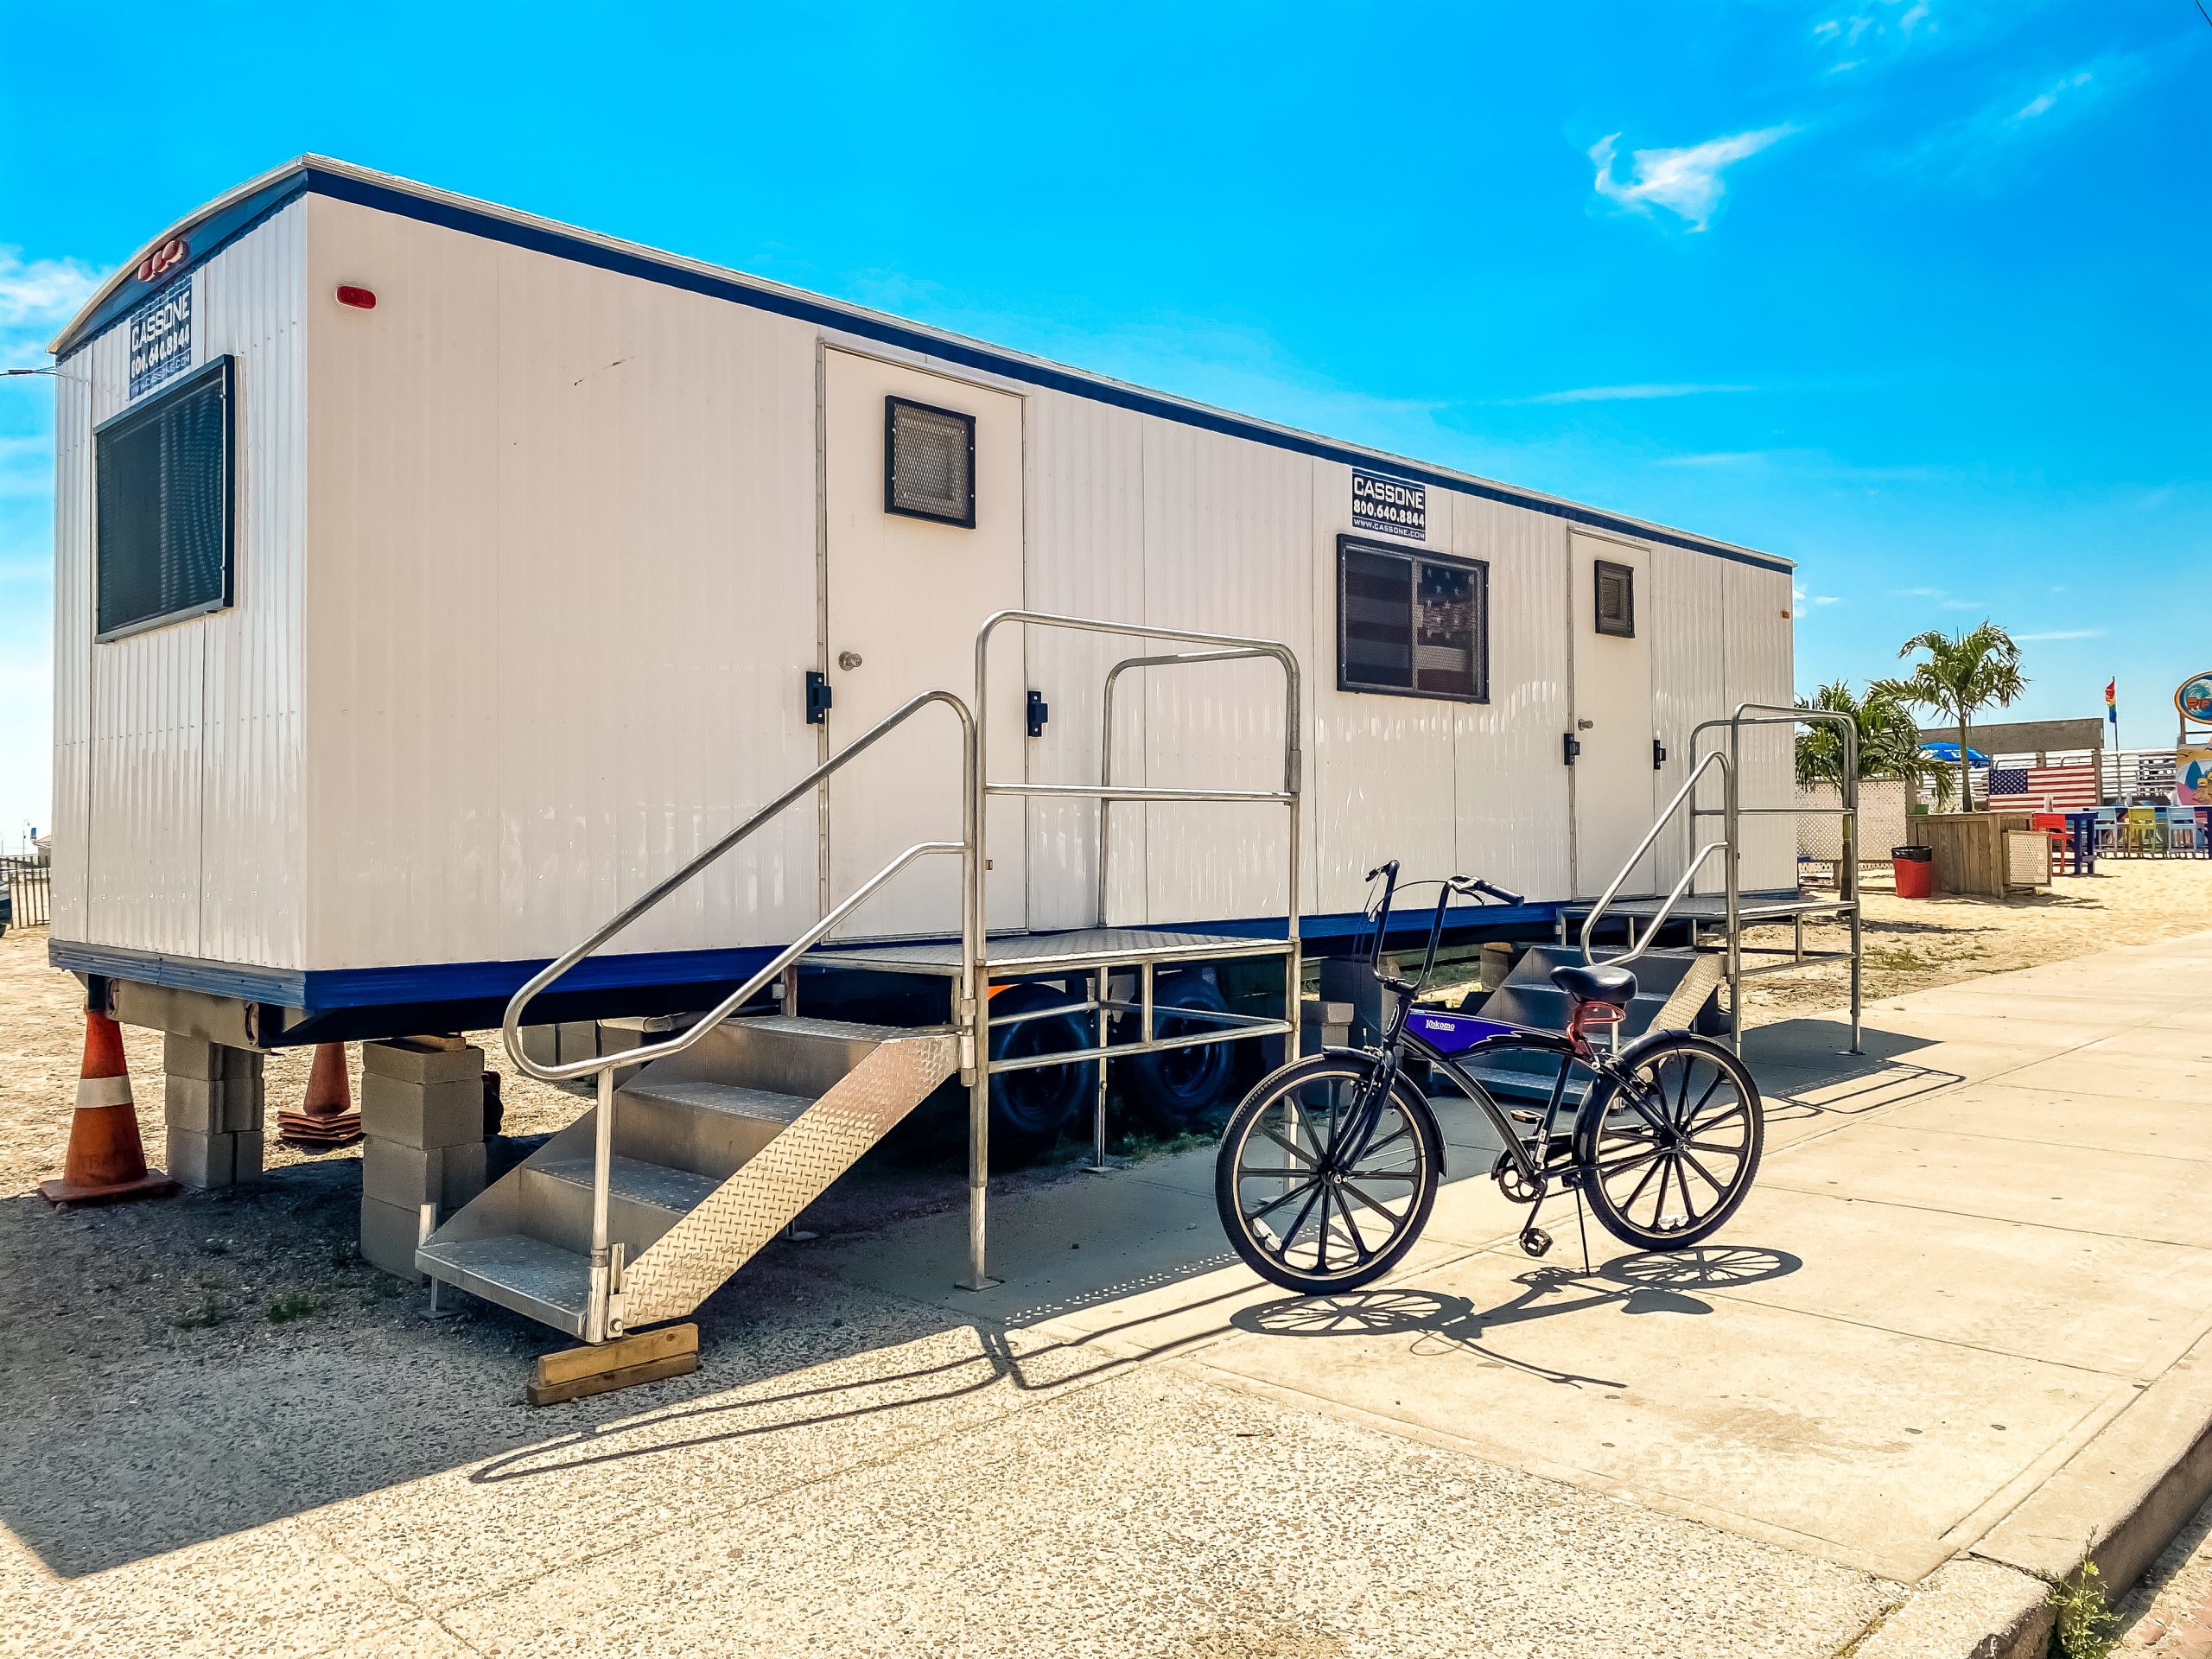 What You Should Know Before You Buy a Used Office Trailer - Cassone